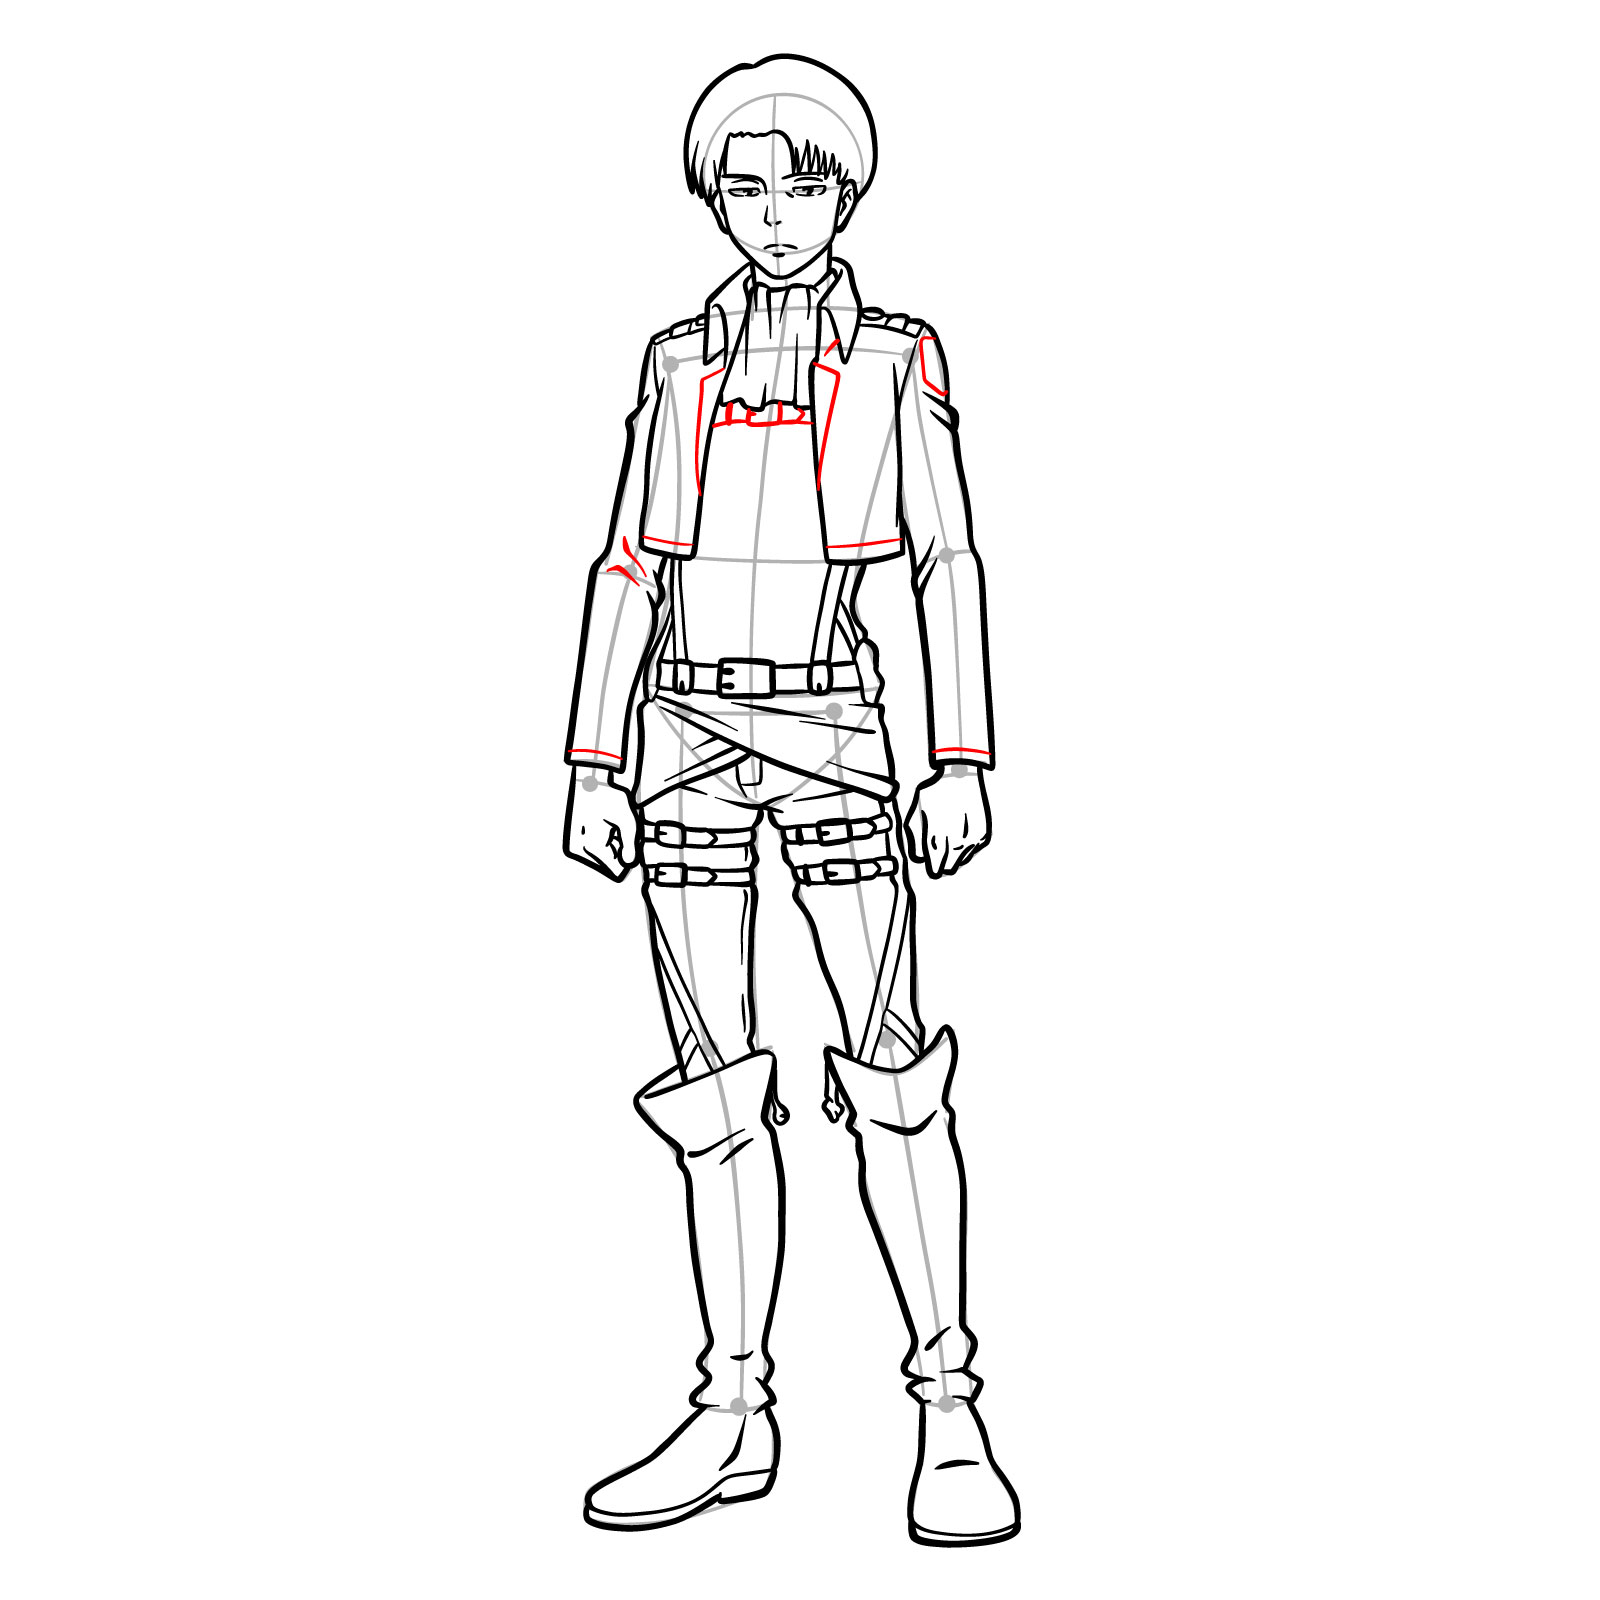 How to draw details of Captain Levi's shirt and jacket - step 24